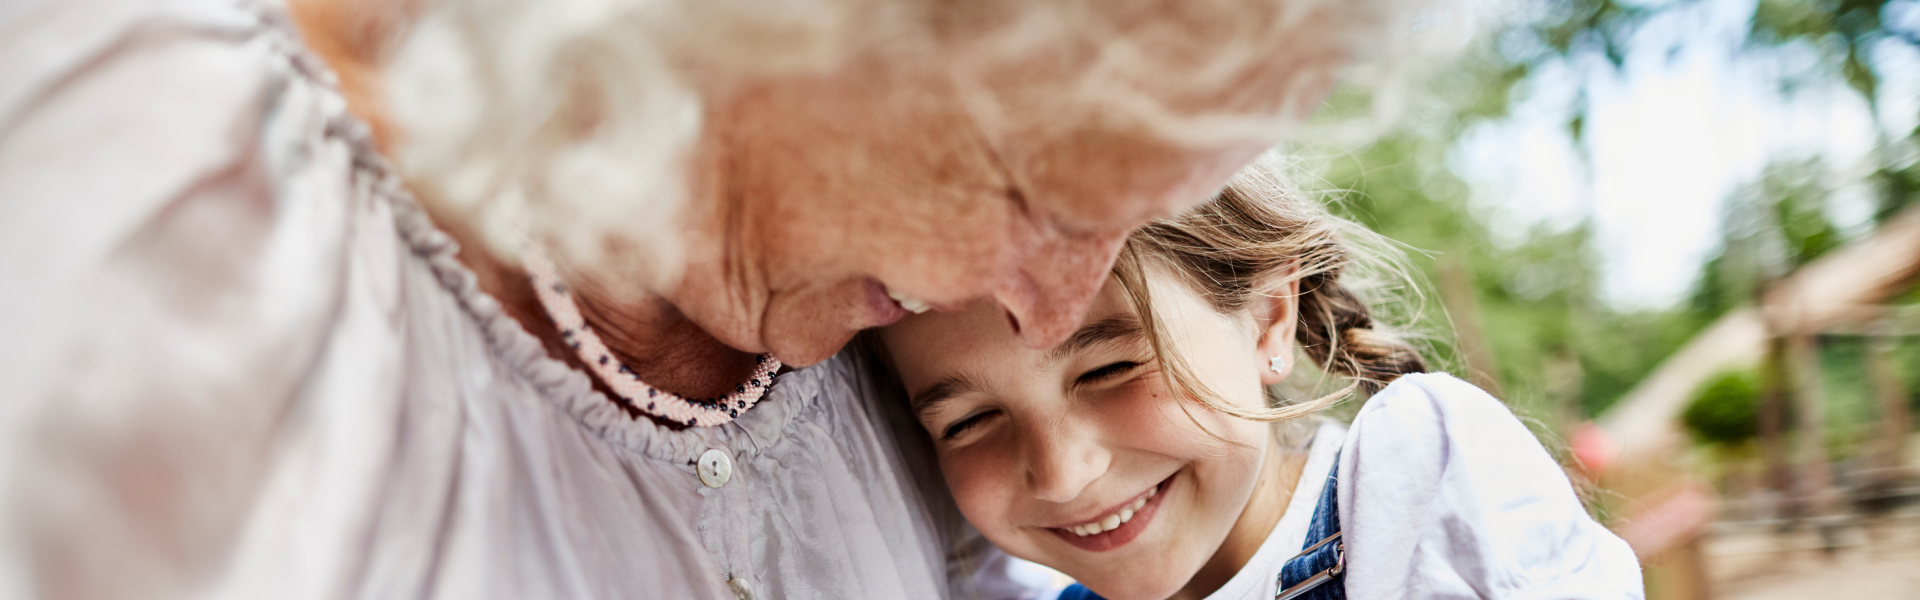 A young smiling girl is leaning into an older woman’s chest.